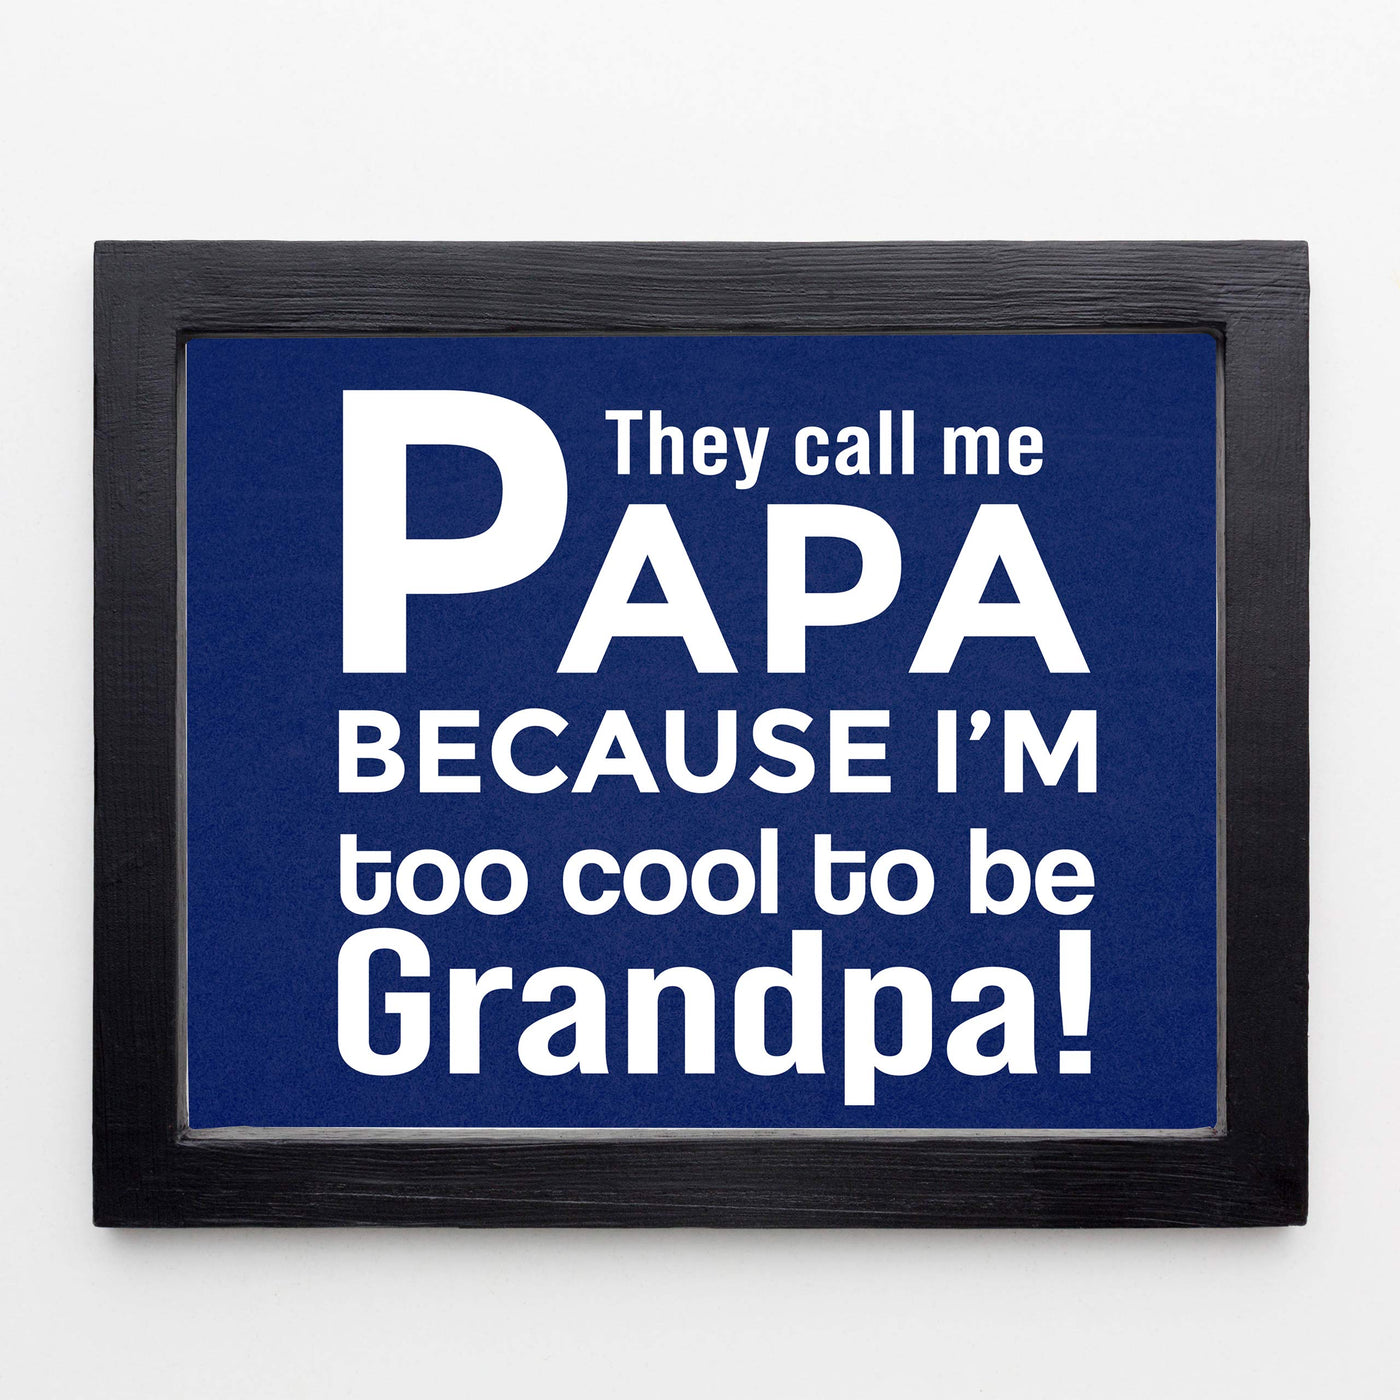 They Call Me Papa Funny Family Sign -10 x 8" Inspirational Wall Art Sign. Humorous Grandparent Wall Print-Ready to Frame. Perfect for Home-Office-Guest House Decor. Great Gift for Grandpa!